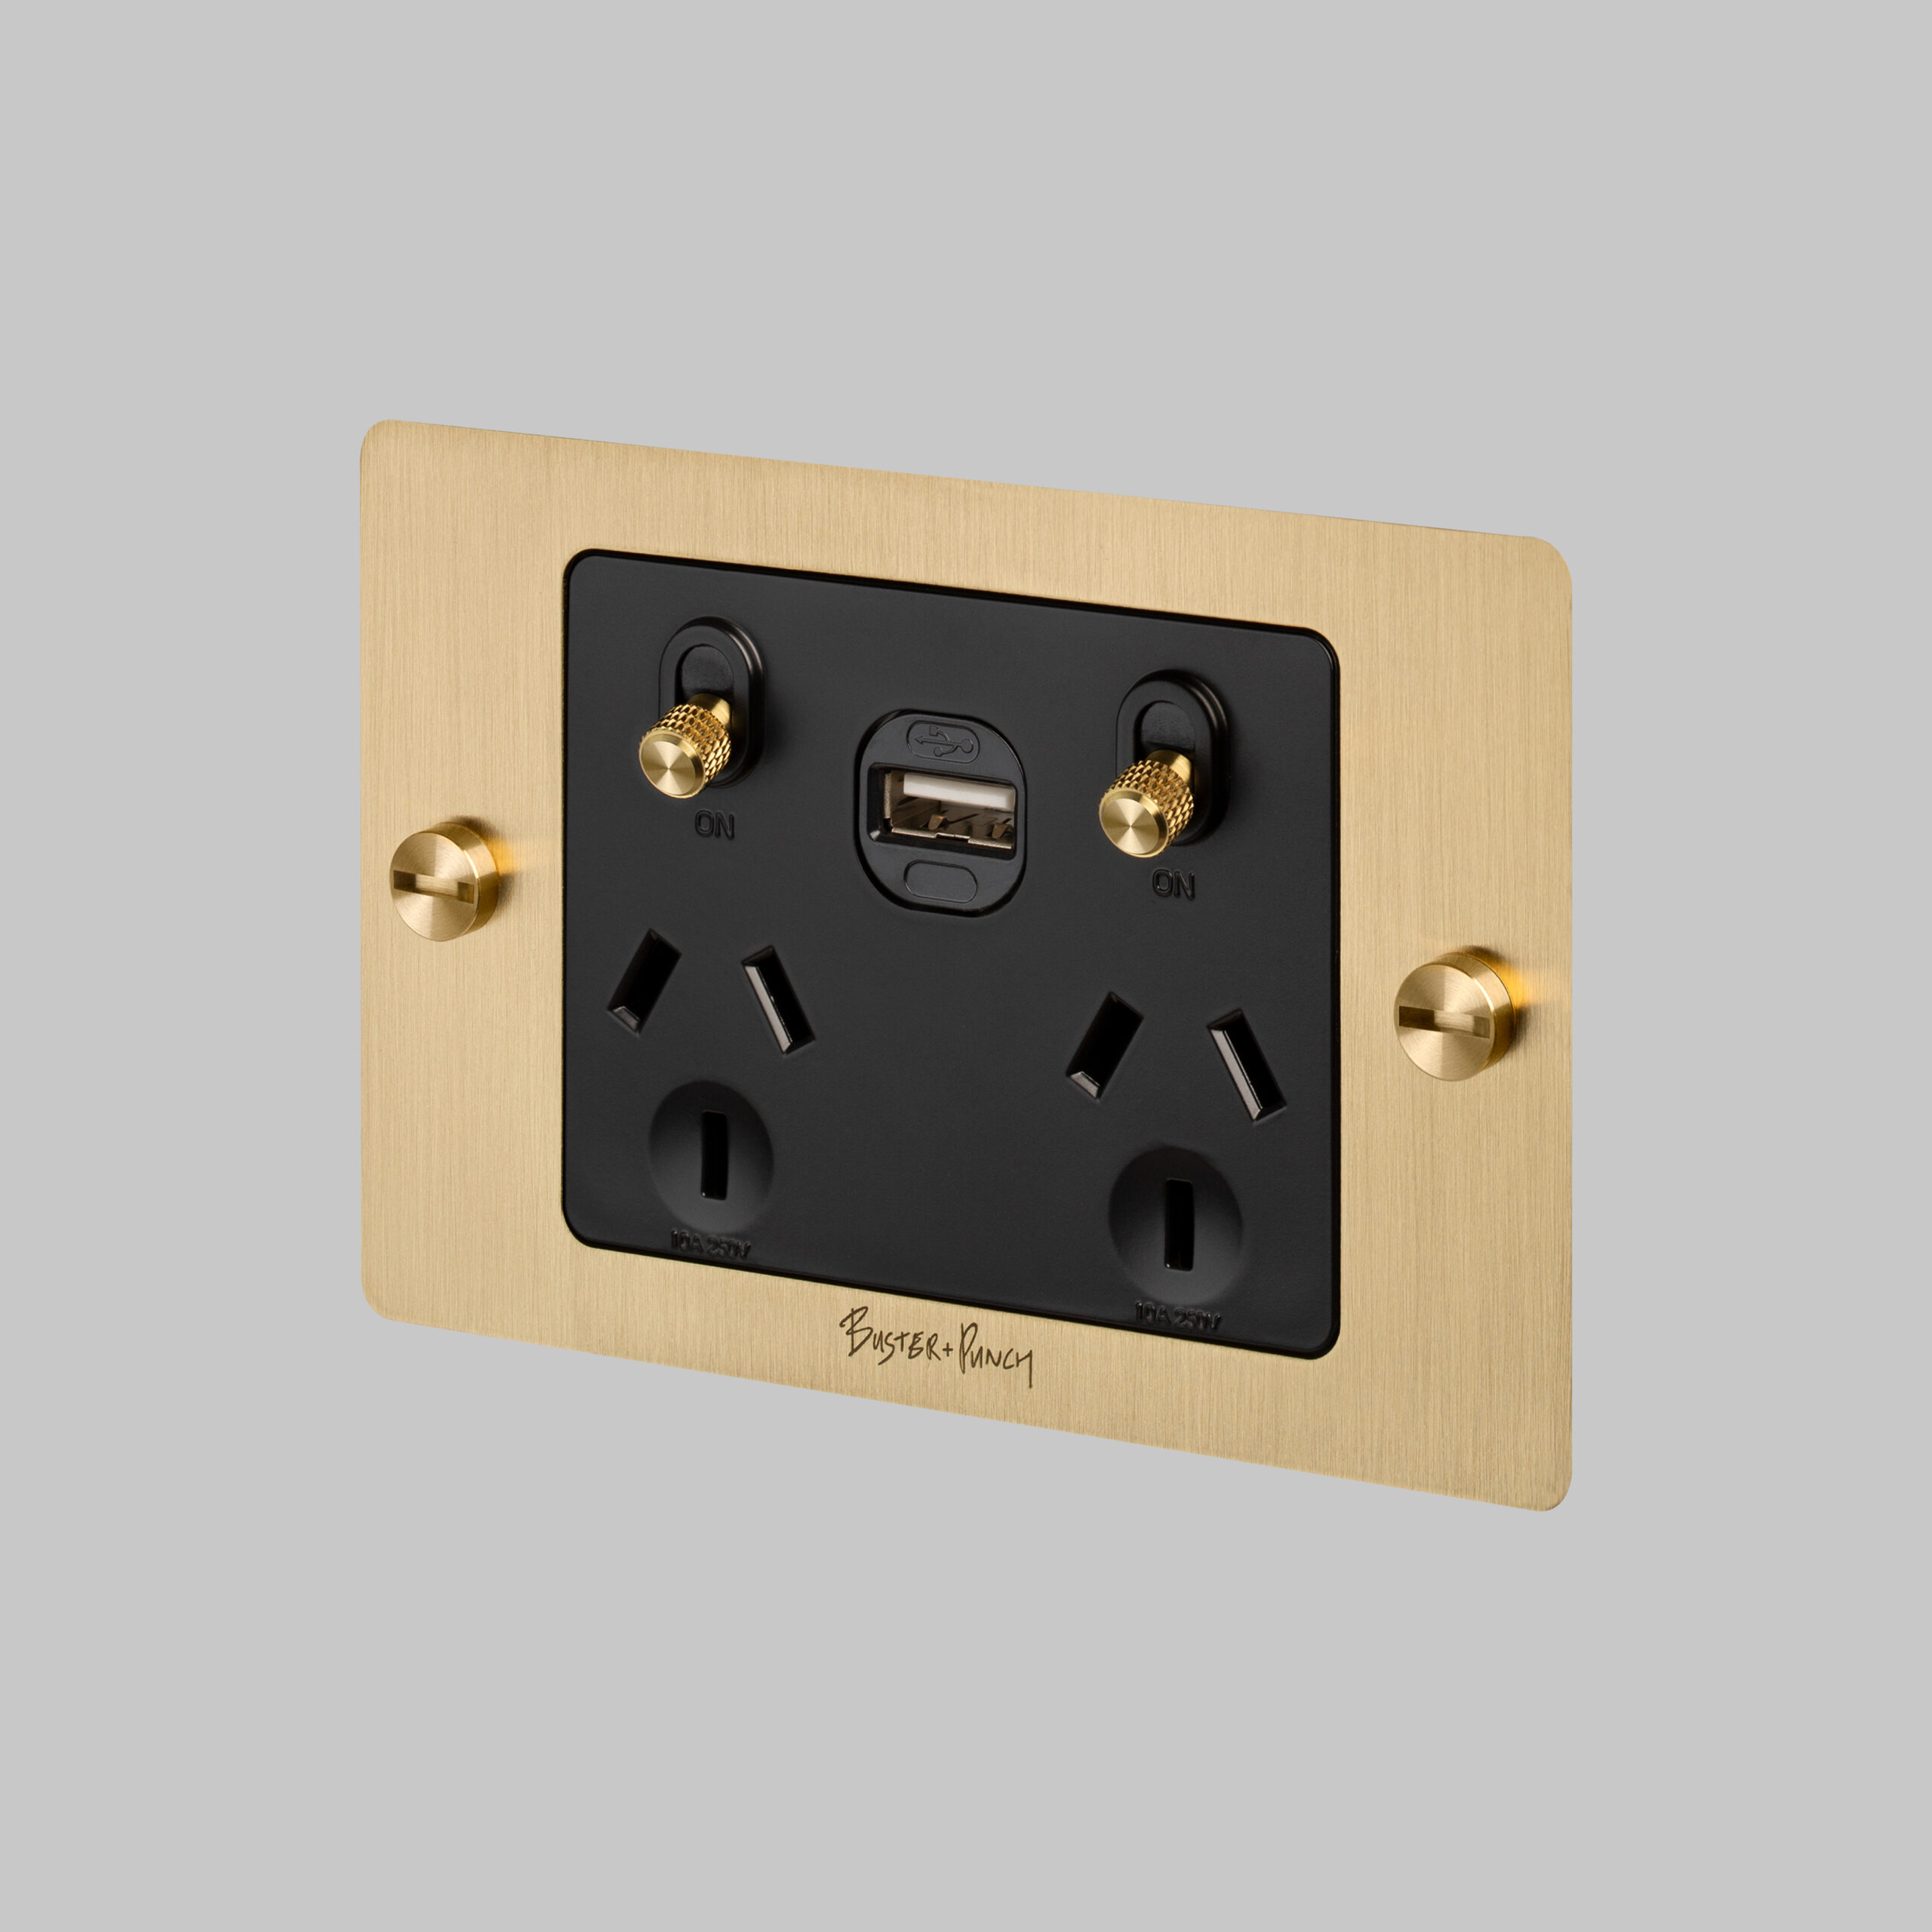 Smoked Gold and Gold DESIGNER SOCKETS AND SWITCHES 